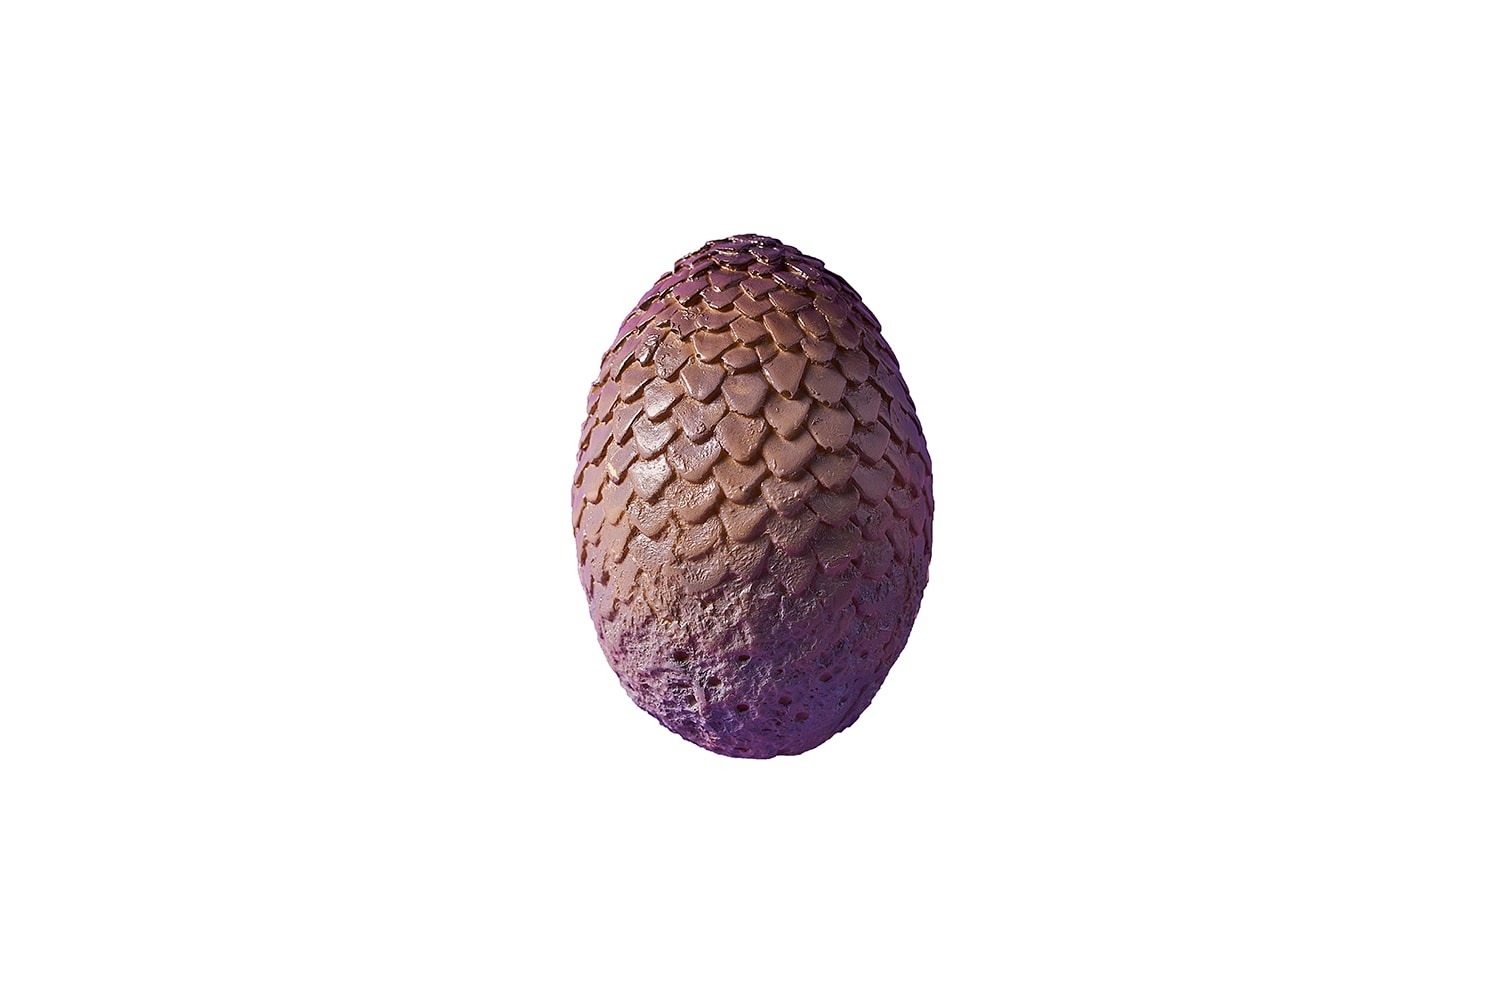 Deliveroo Game of Thrones Chocolate Dragon Egg